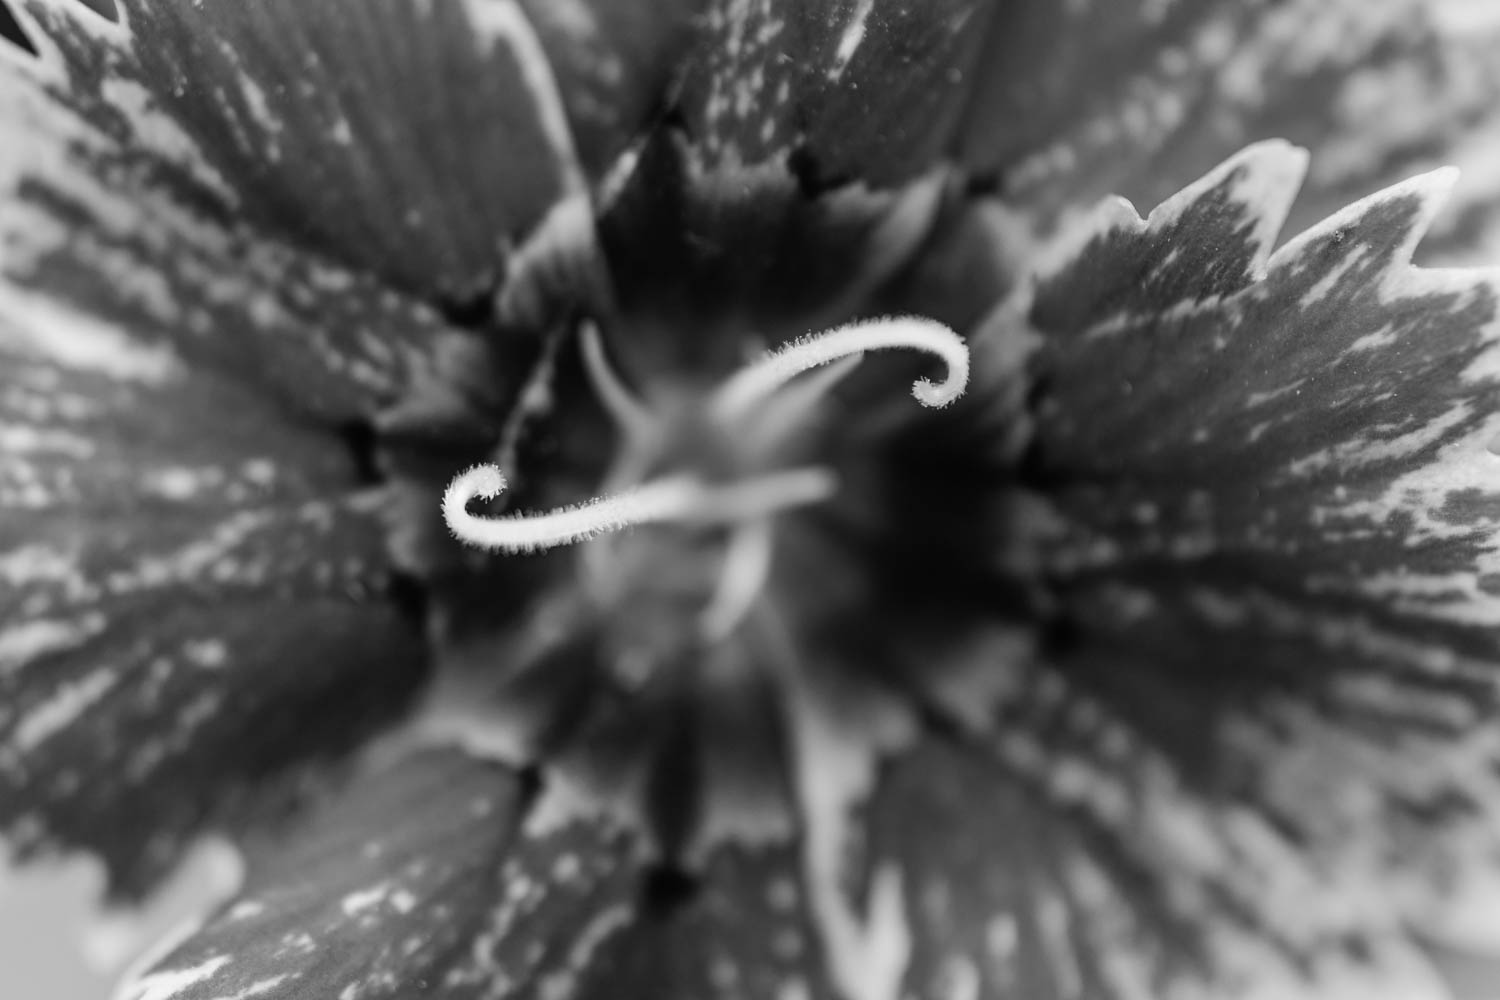 Dianthus black and white photograph.